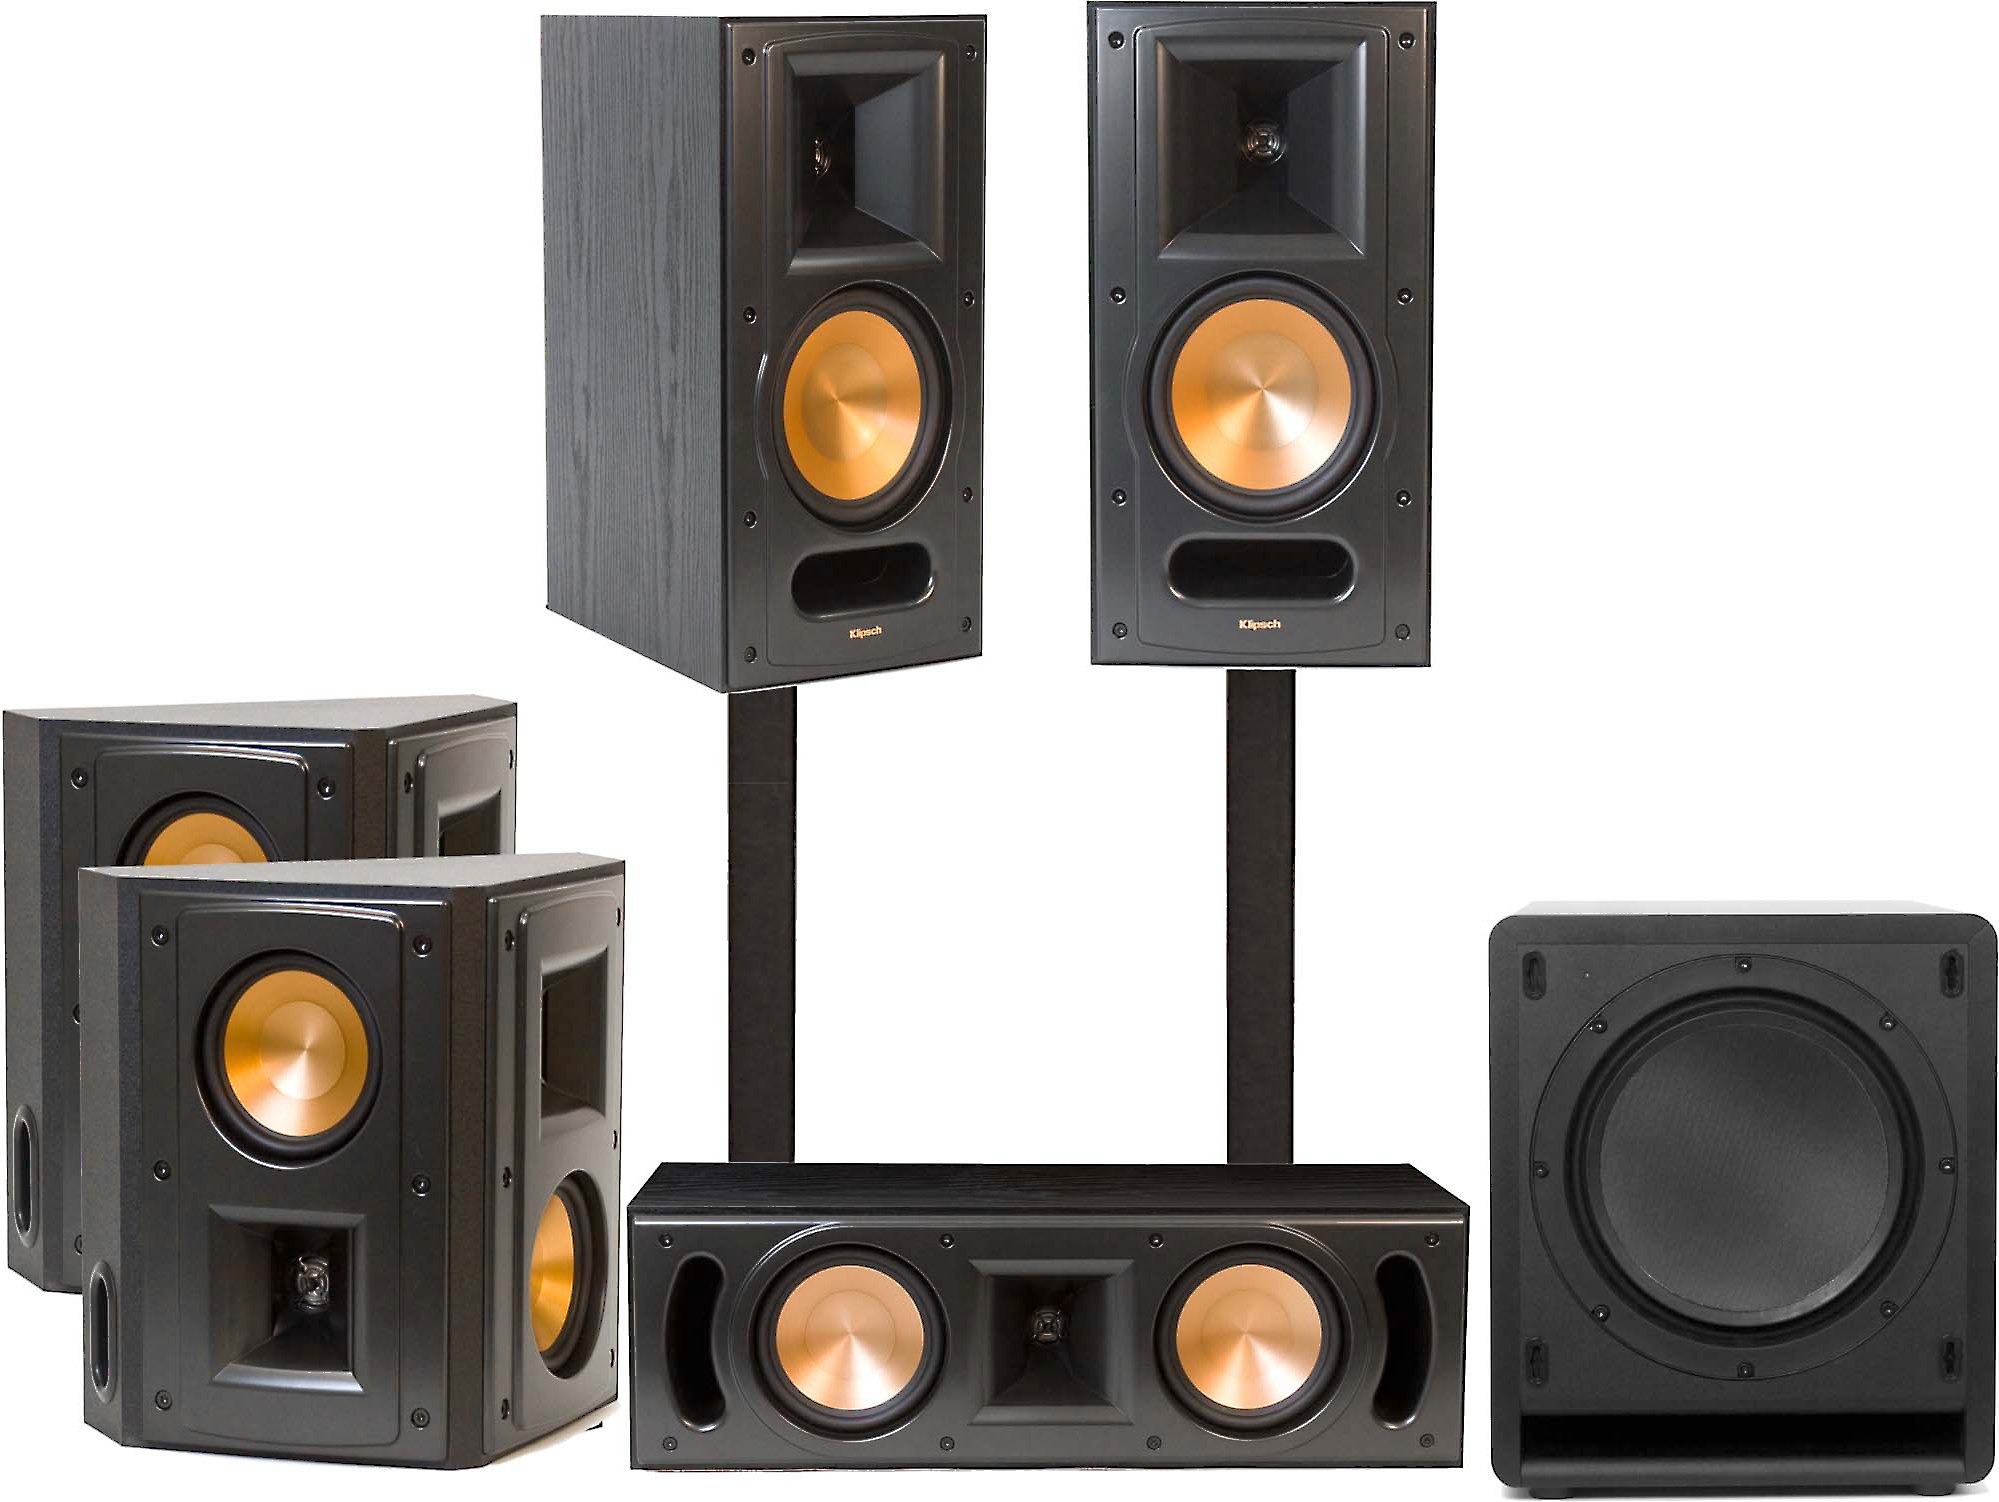 Klipsch Rb 61 Ii 5 1 Home Theater Speaker System Featuring High